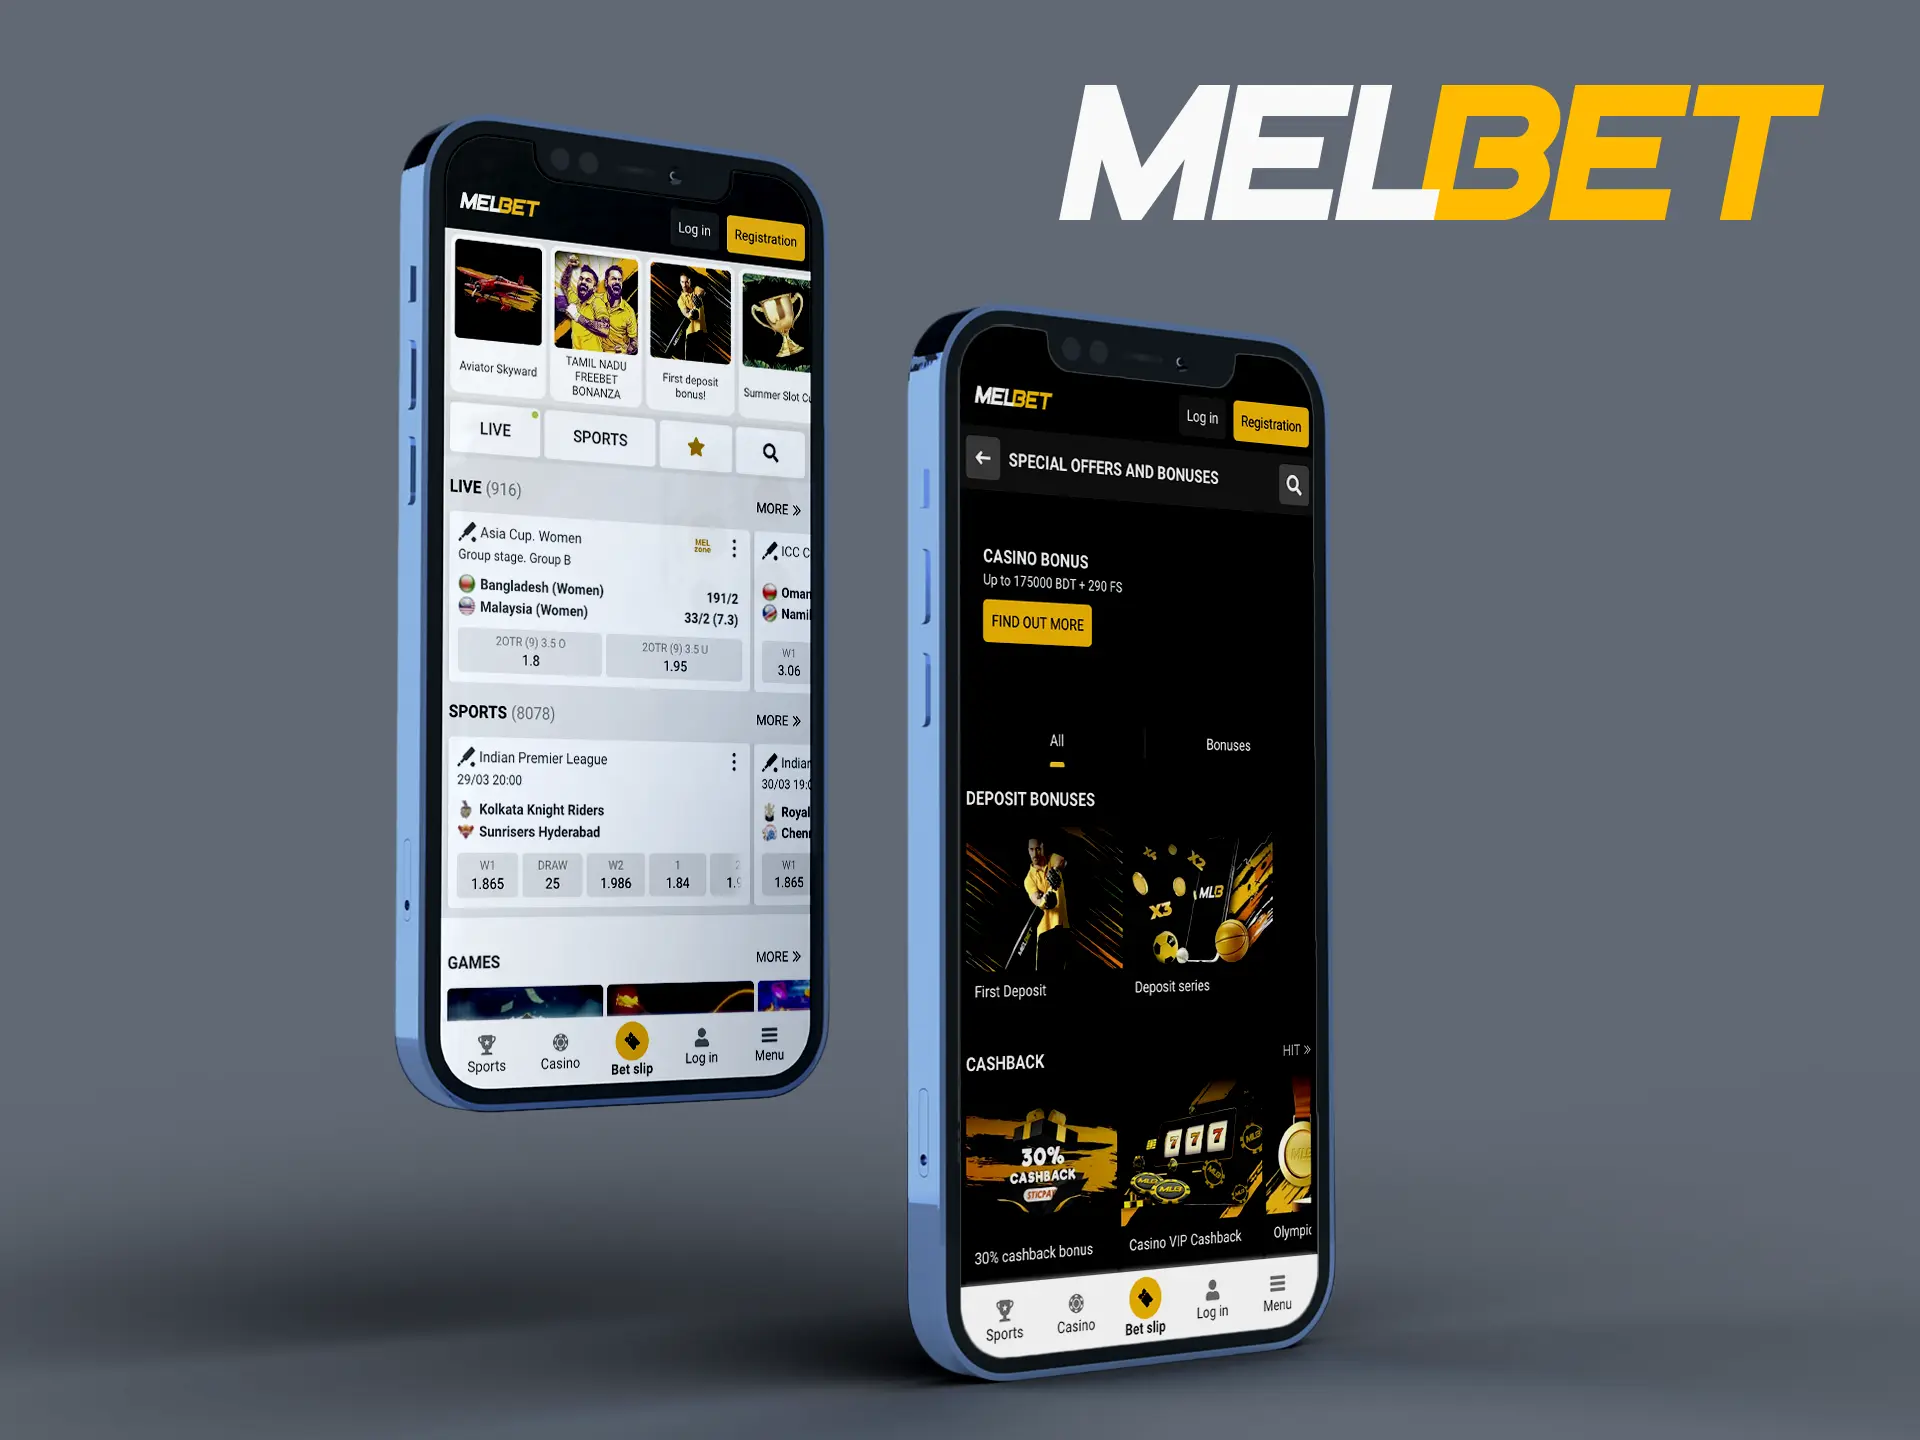 Melbet is a unique app with fast payouts and quality support service.